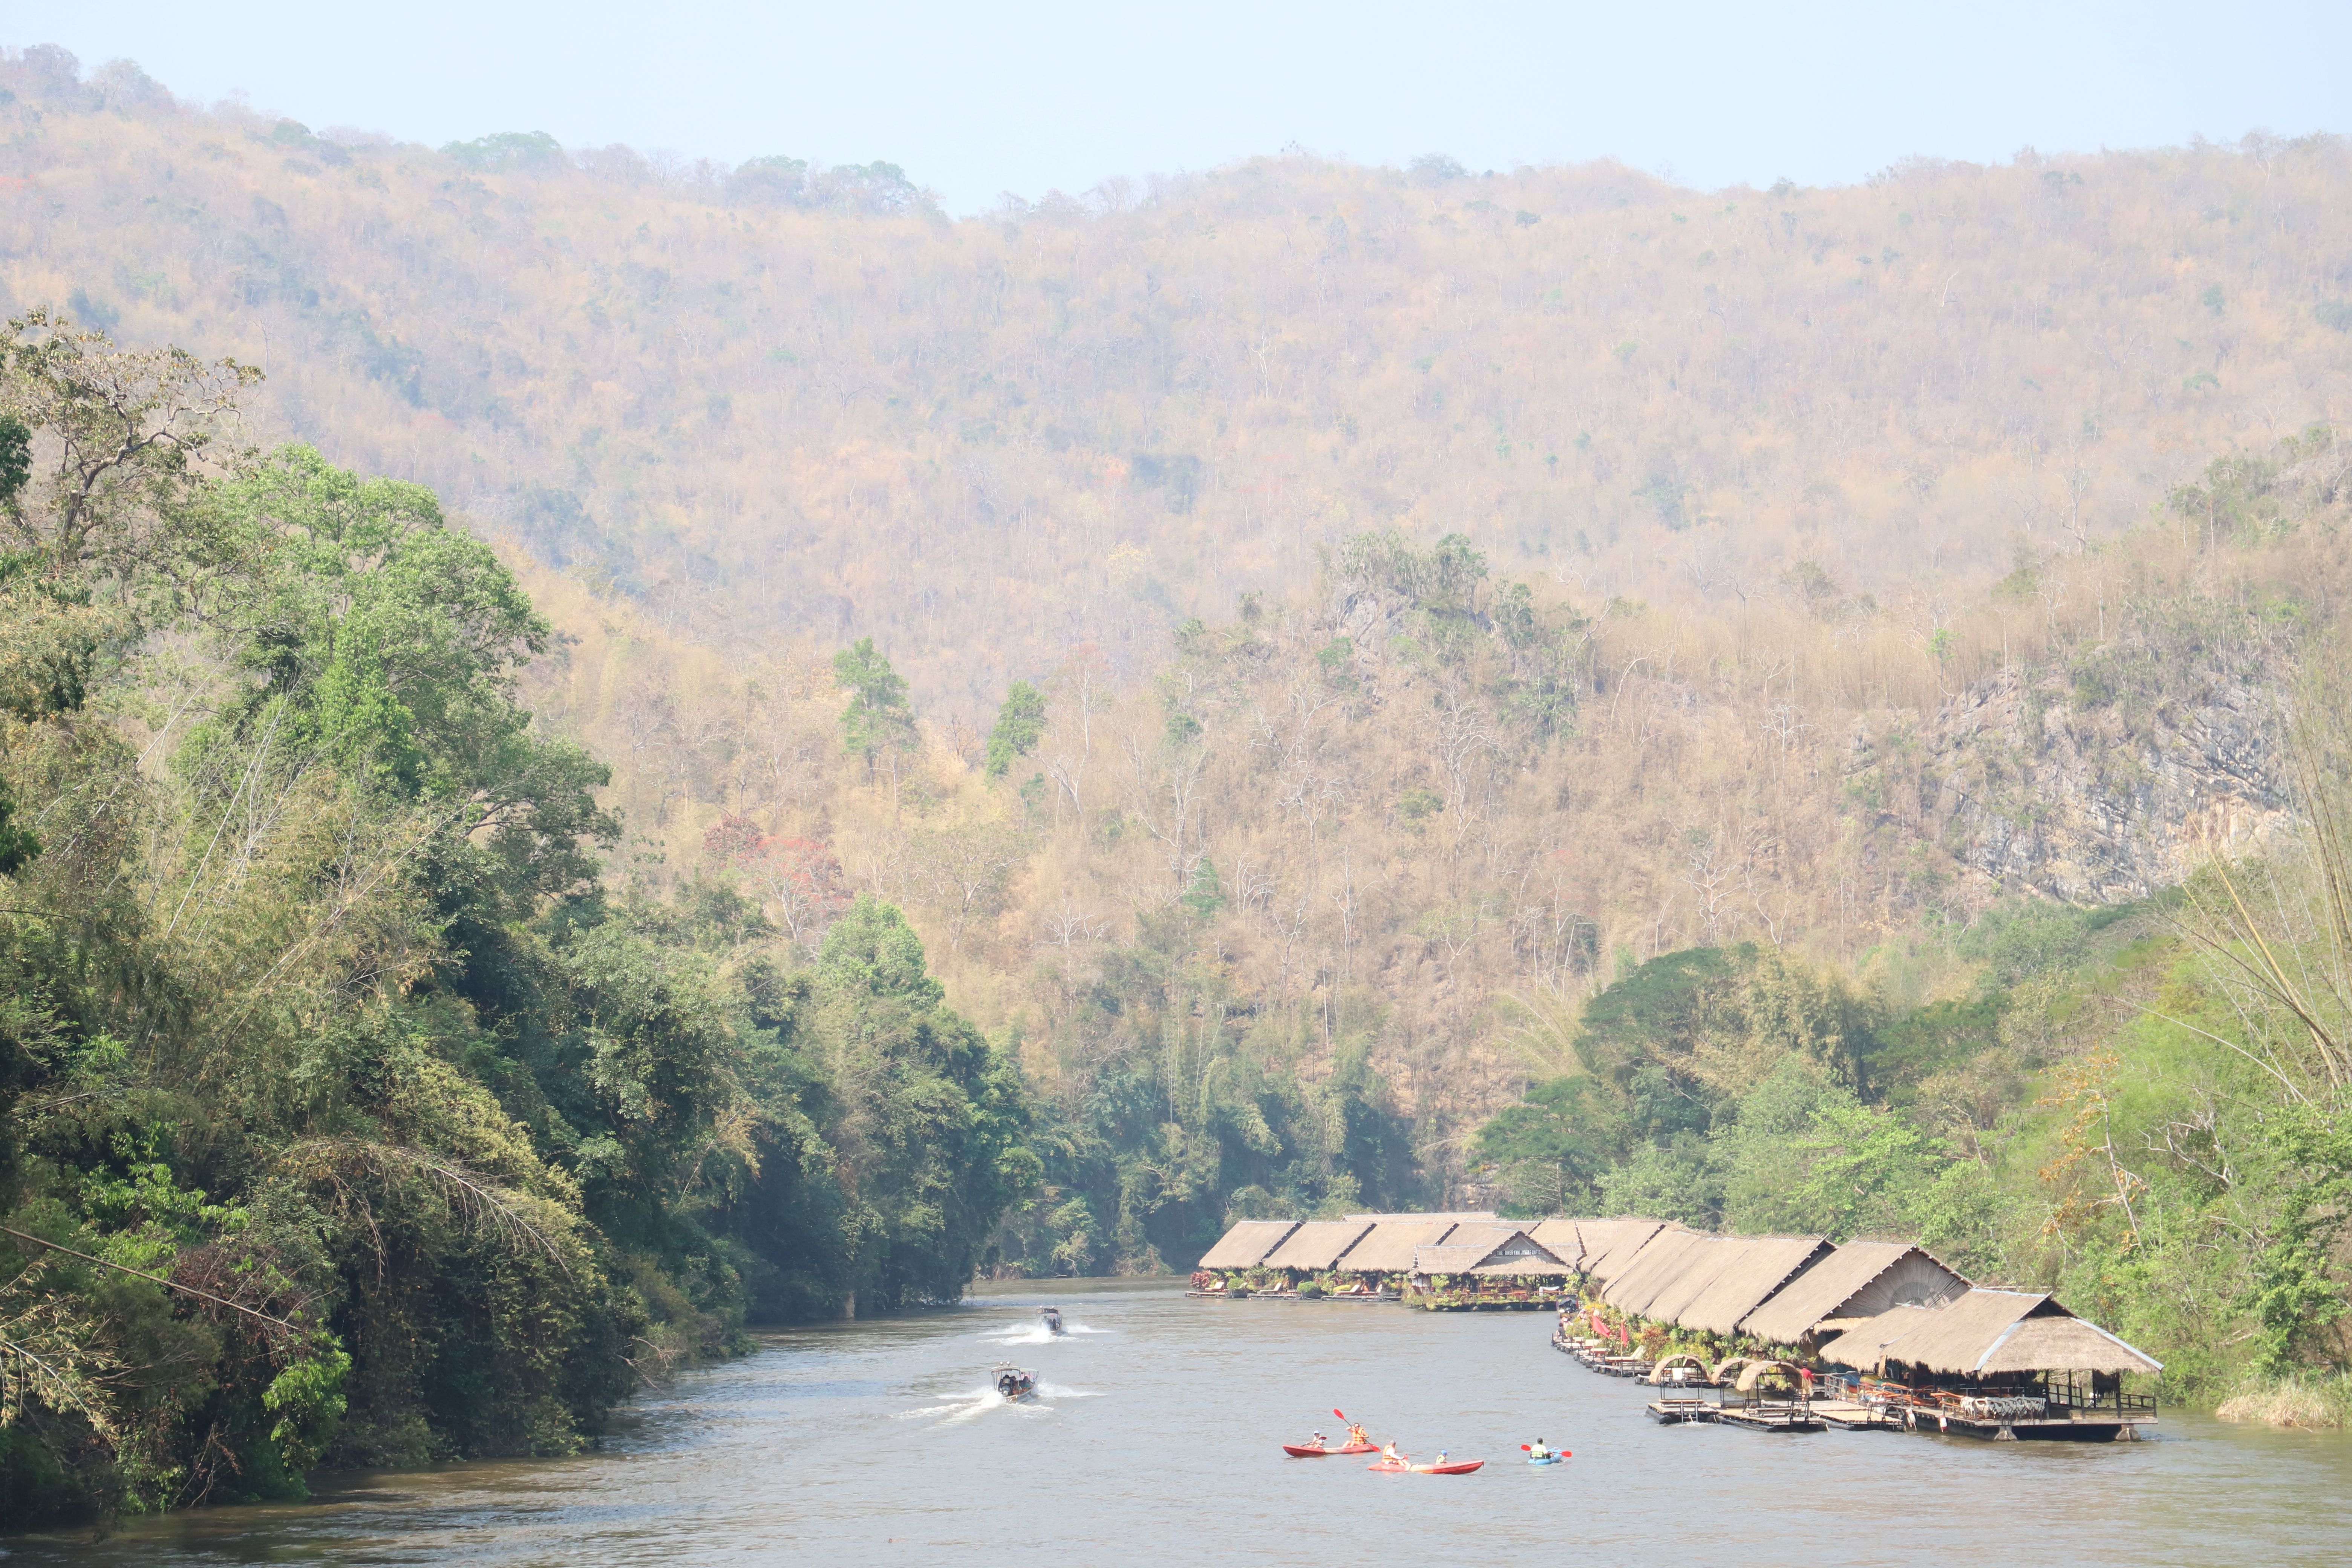 Floating Hotel on the River Kwai